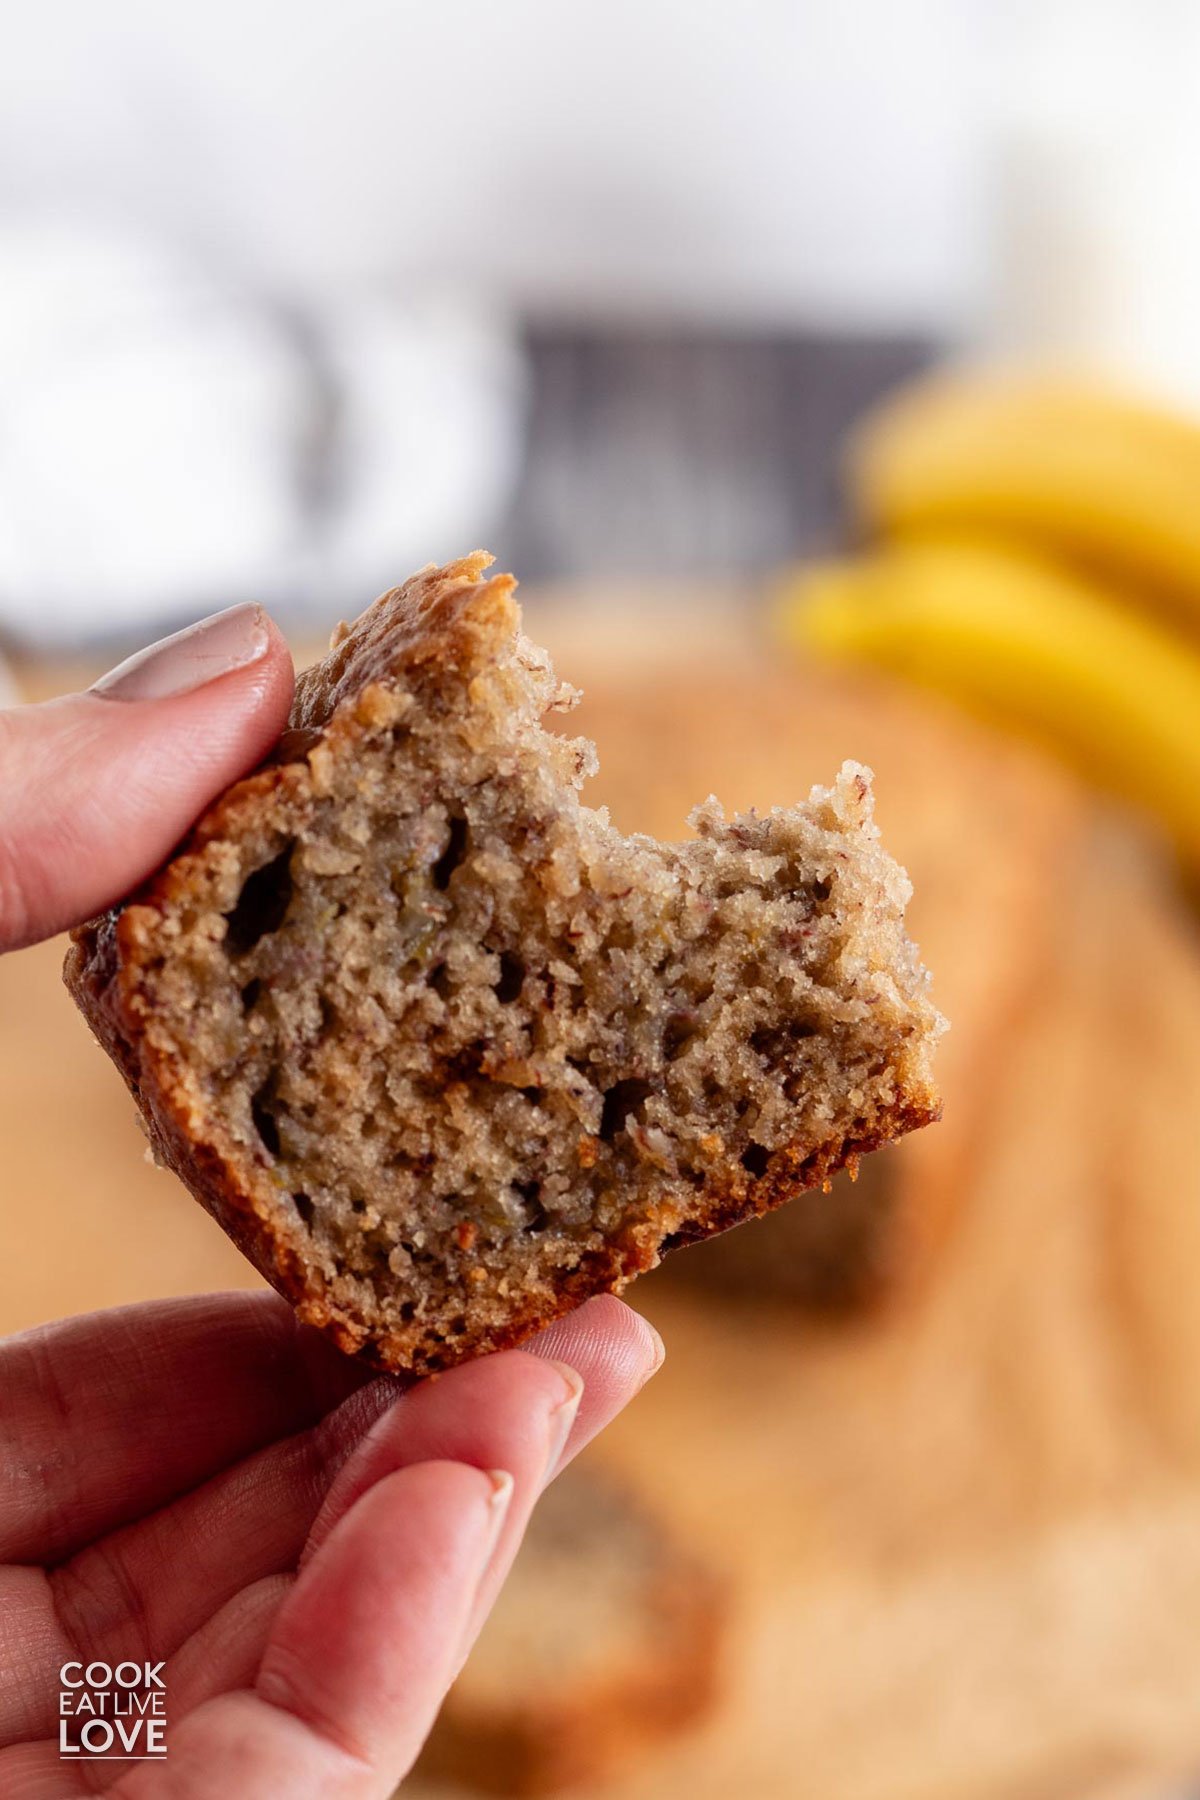 A hand holding up a piece of banana bread no butter with a bite missing.